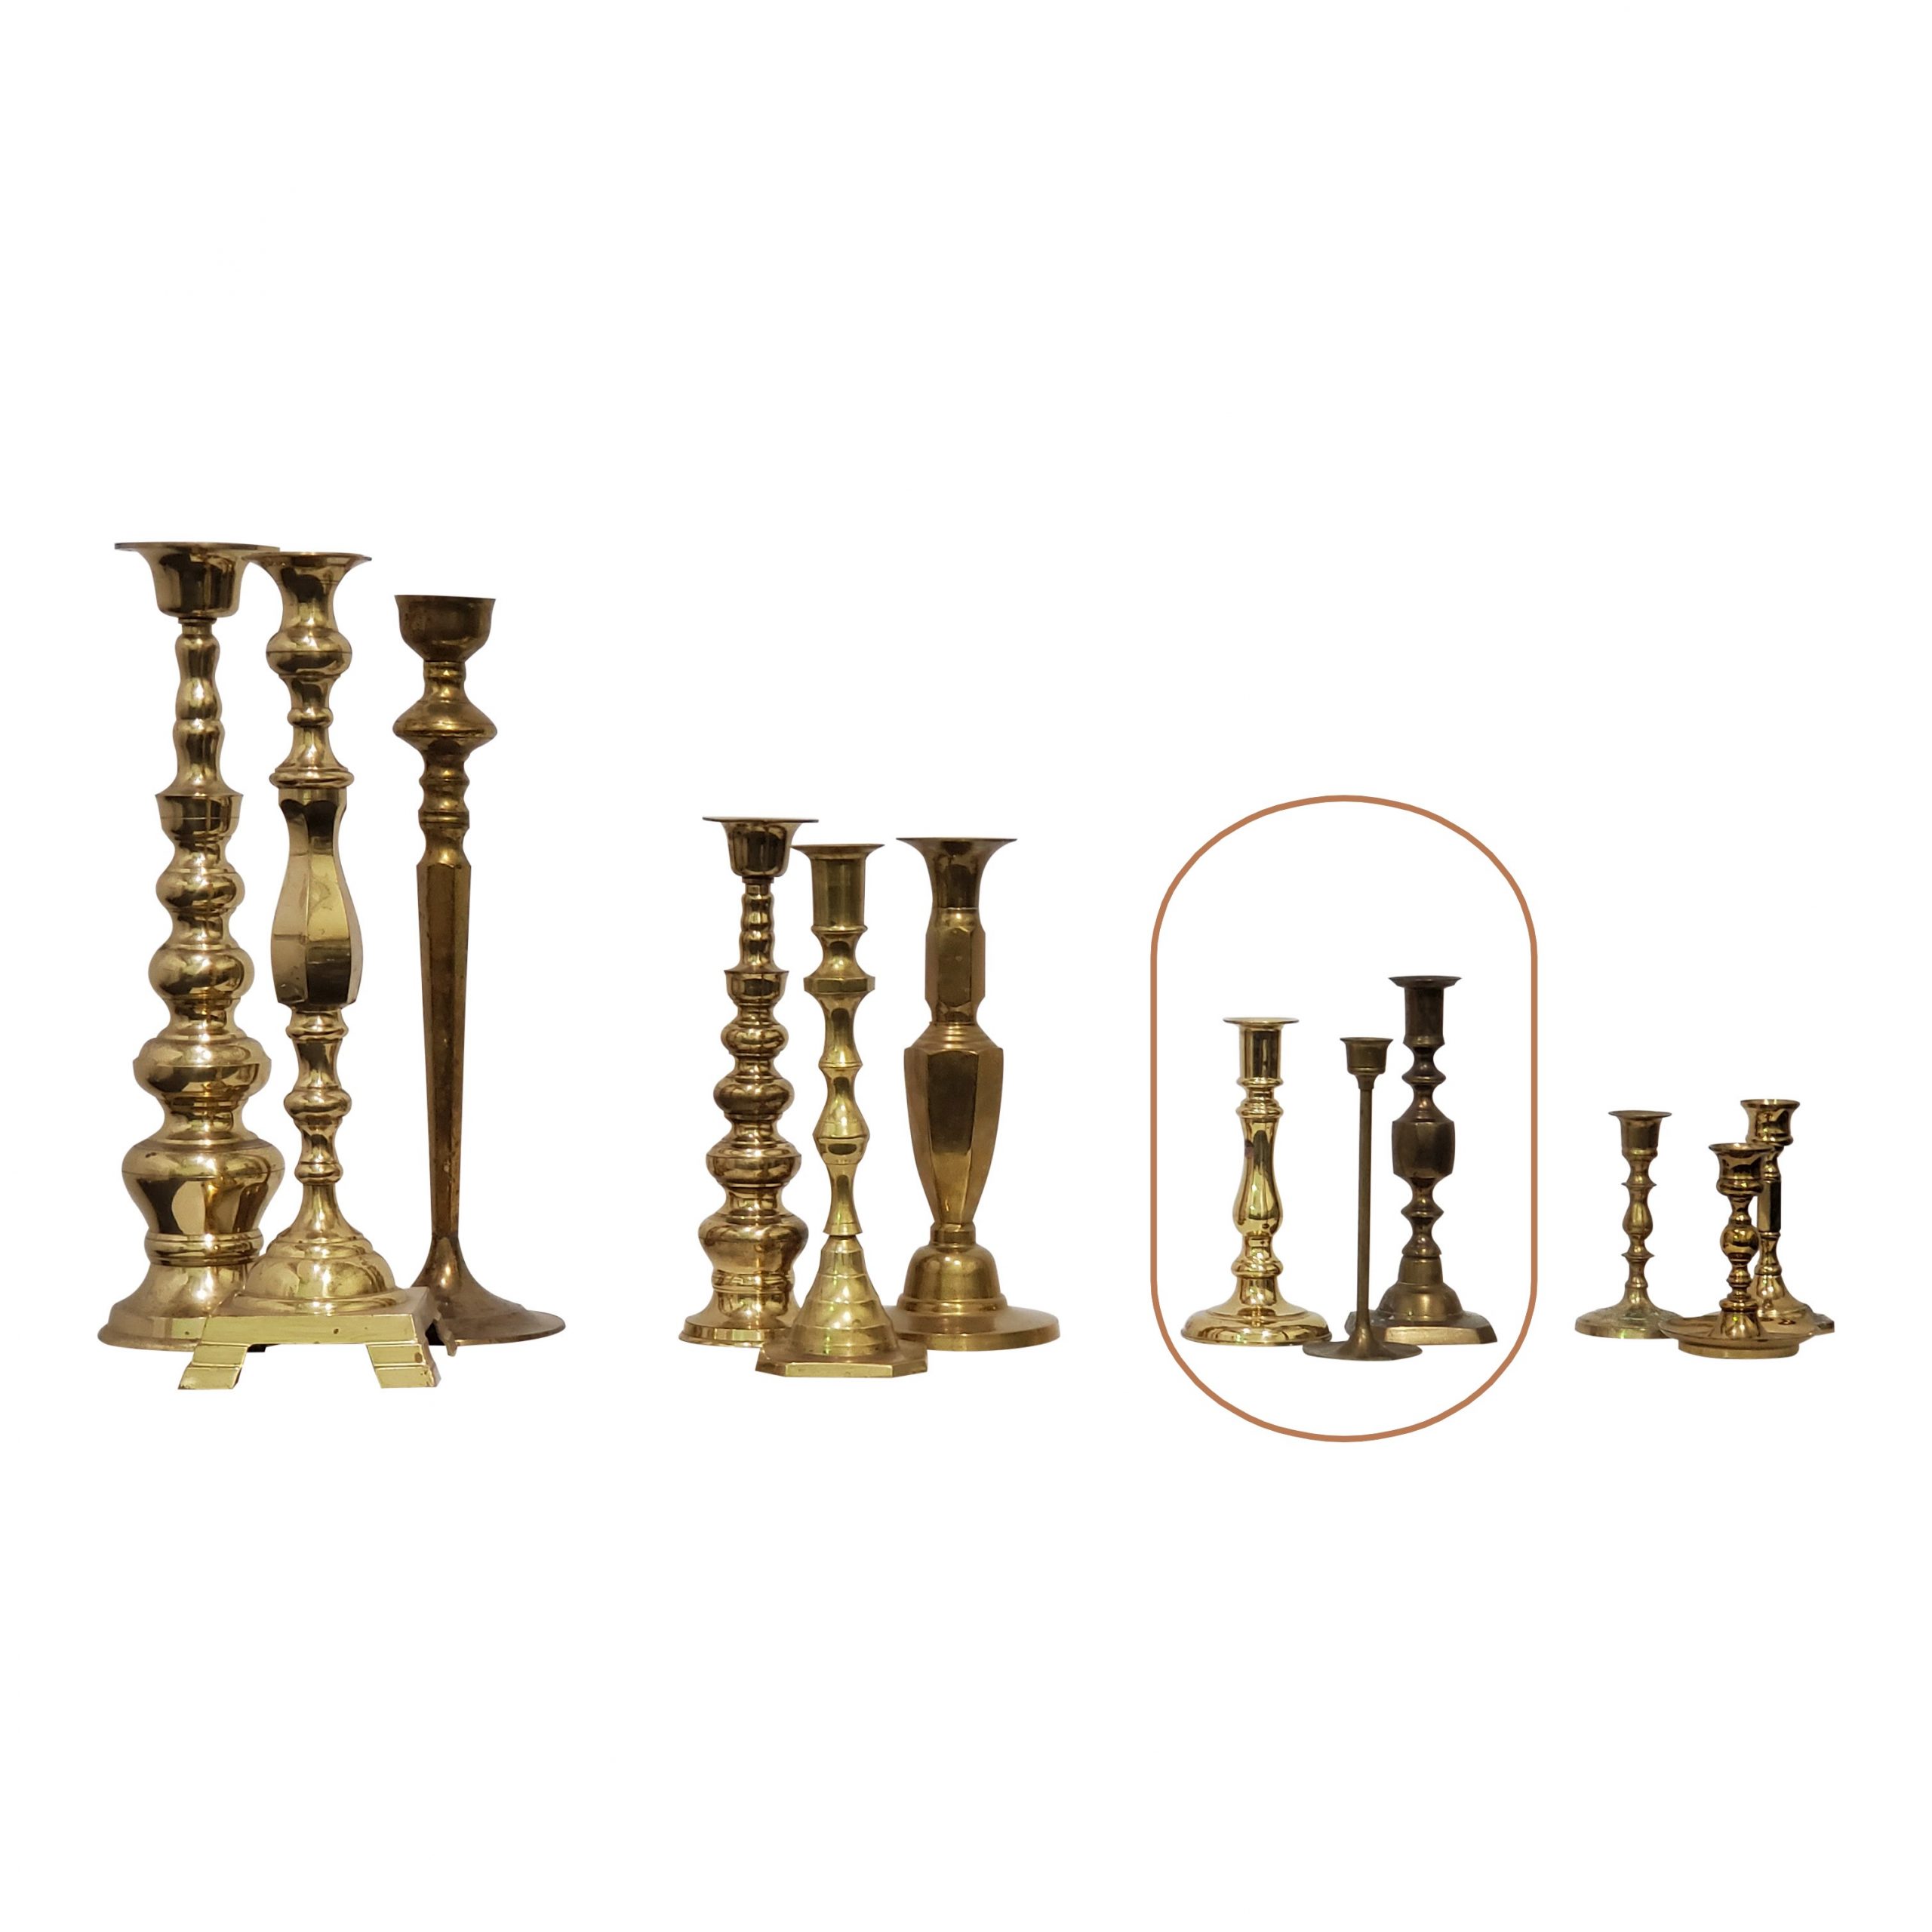 VINTAGE BRASS TAPER CANDLE HOLDERS Rentals San Francisco CA, Where to Rent VINTAGE  BRASS TAPER CANDLE HOLDERS in San Francisco Bay Area, Napa, Sonoma and  Northern California